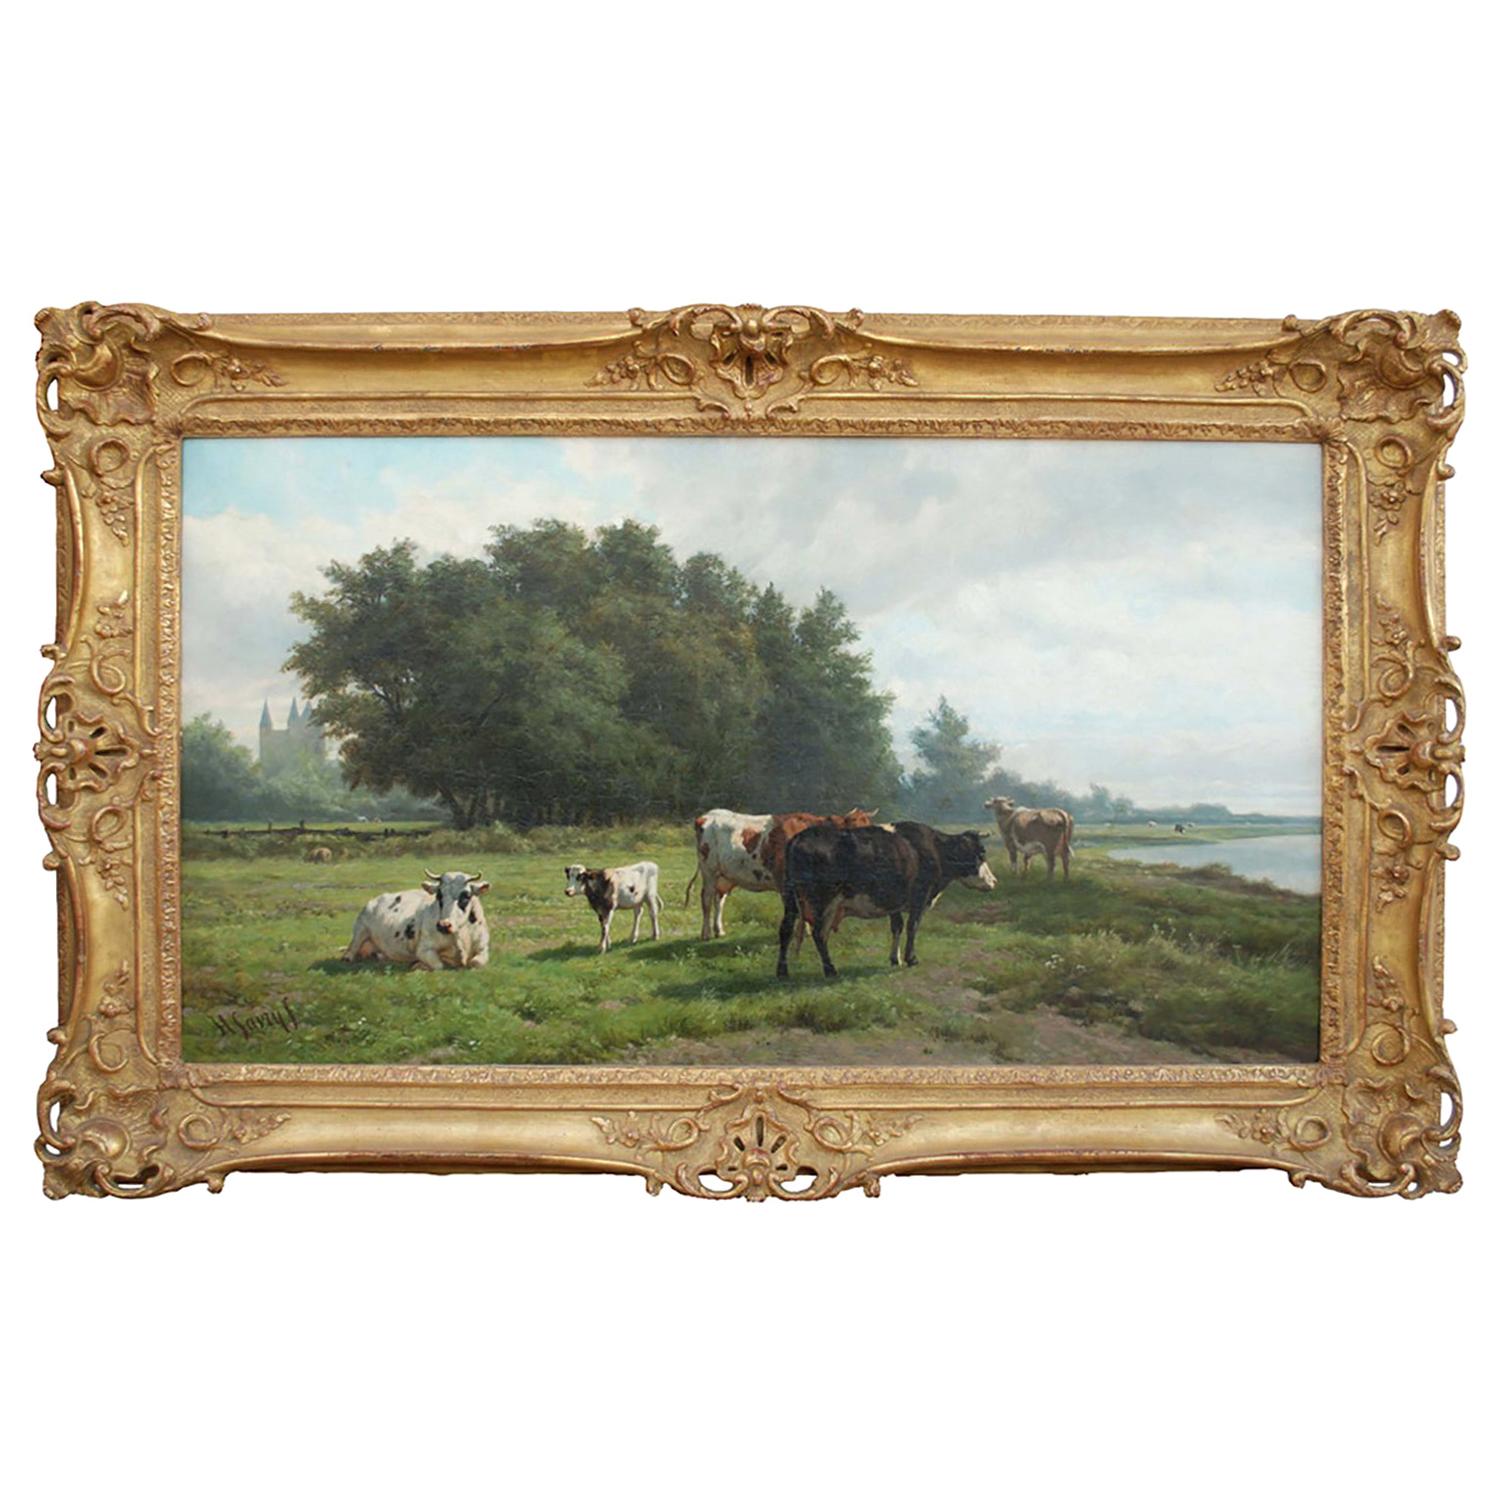 'Cows at Pasture' 19th Century Dutch Pastoral Oil Painting by Hendrik Savrij